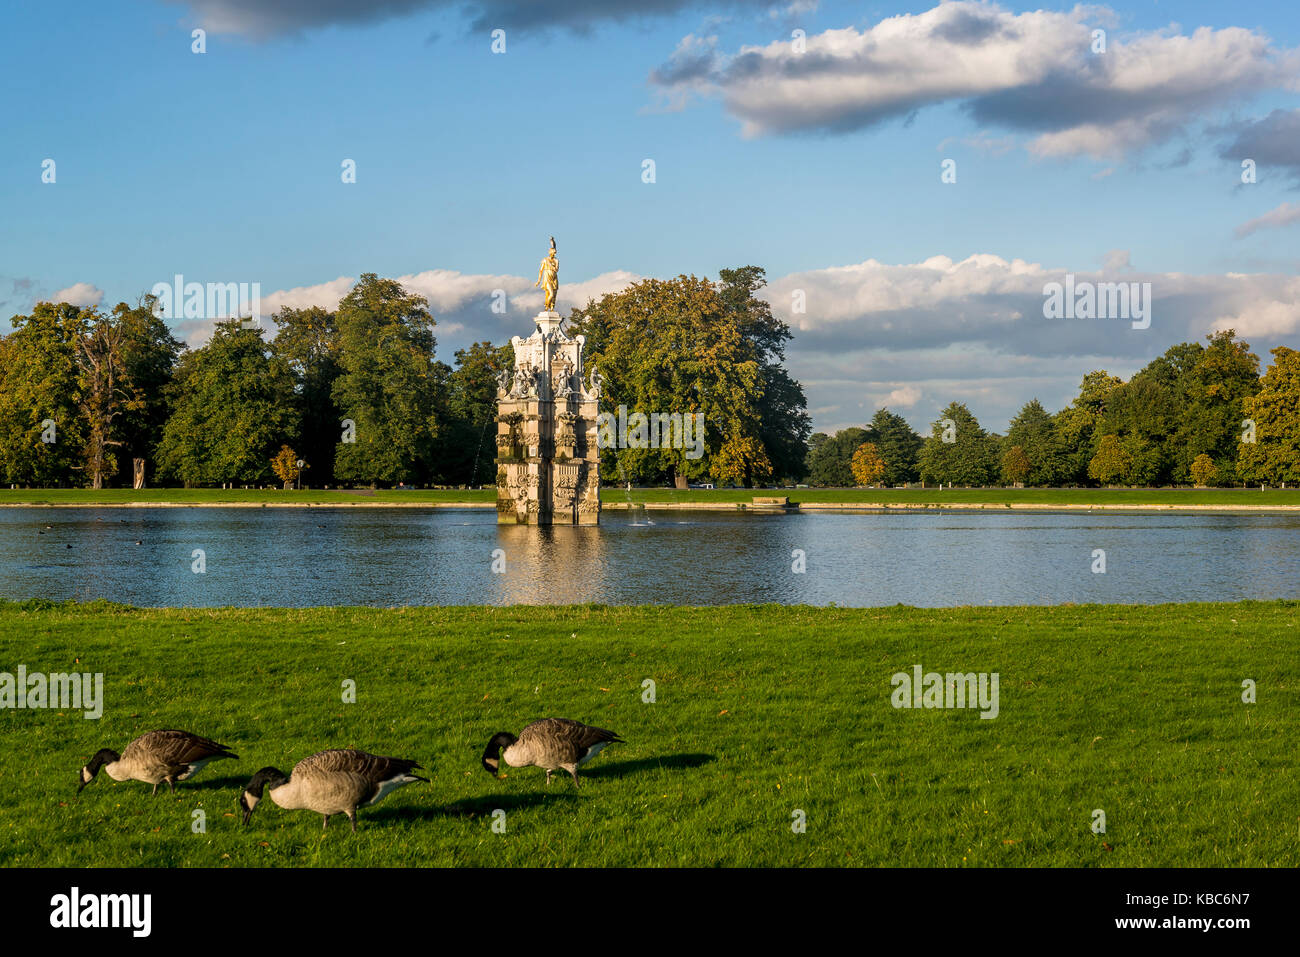 Three Canada geese and Diana Fountain, a seventeenth-century statue ensemble and water feature in an eighteenth-century setting, Bushy Park, London, E Stock Photo